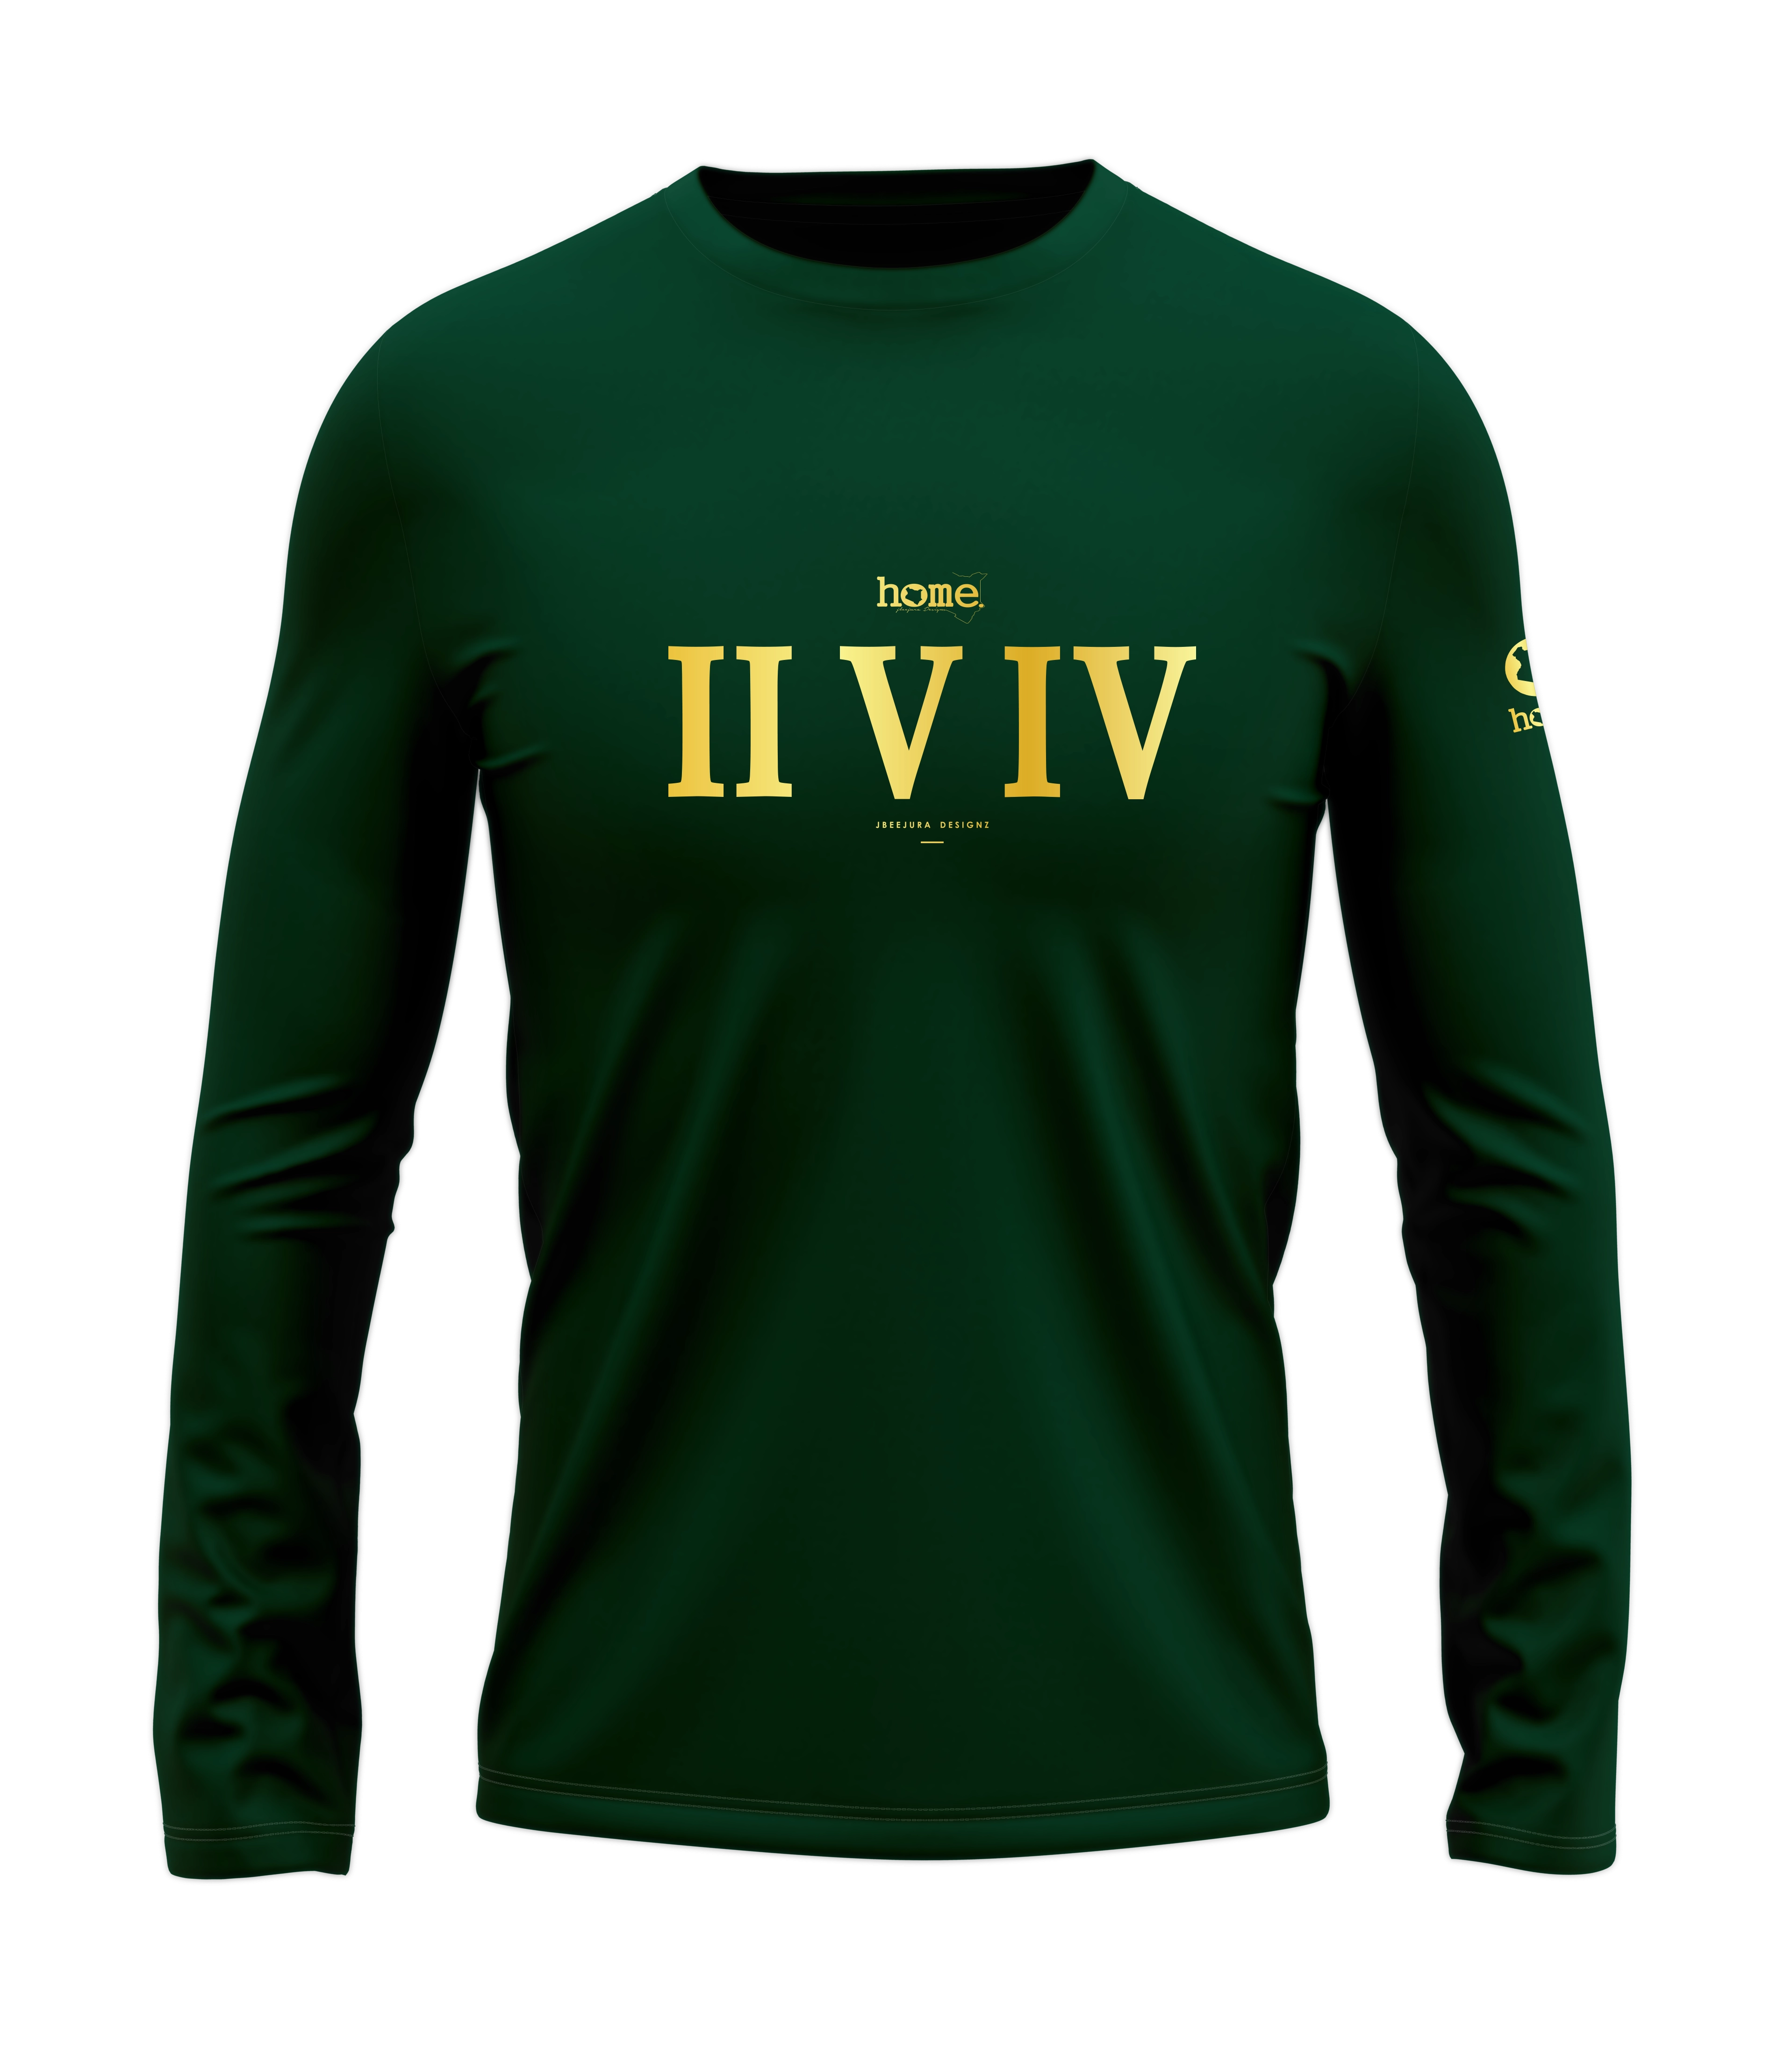 home_254 LONG-SLEEVED RICH GREEN T-SHIRT WITH A GOLD ROMAN NUMERALS PRINT – COTTON PLUS FABRIC